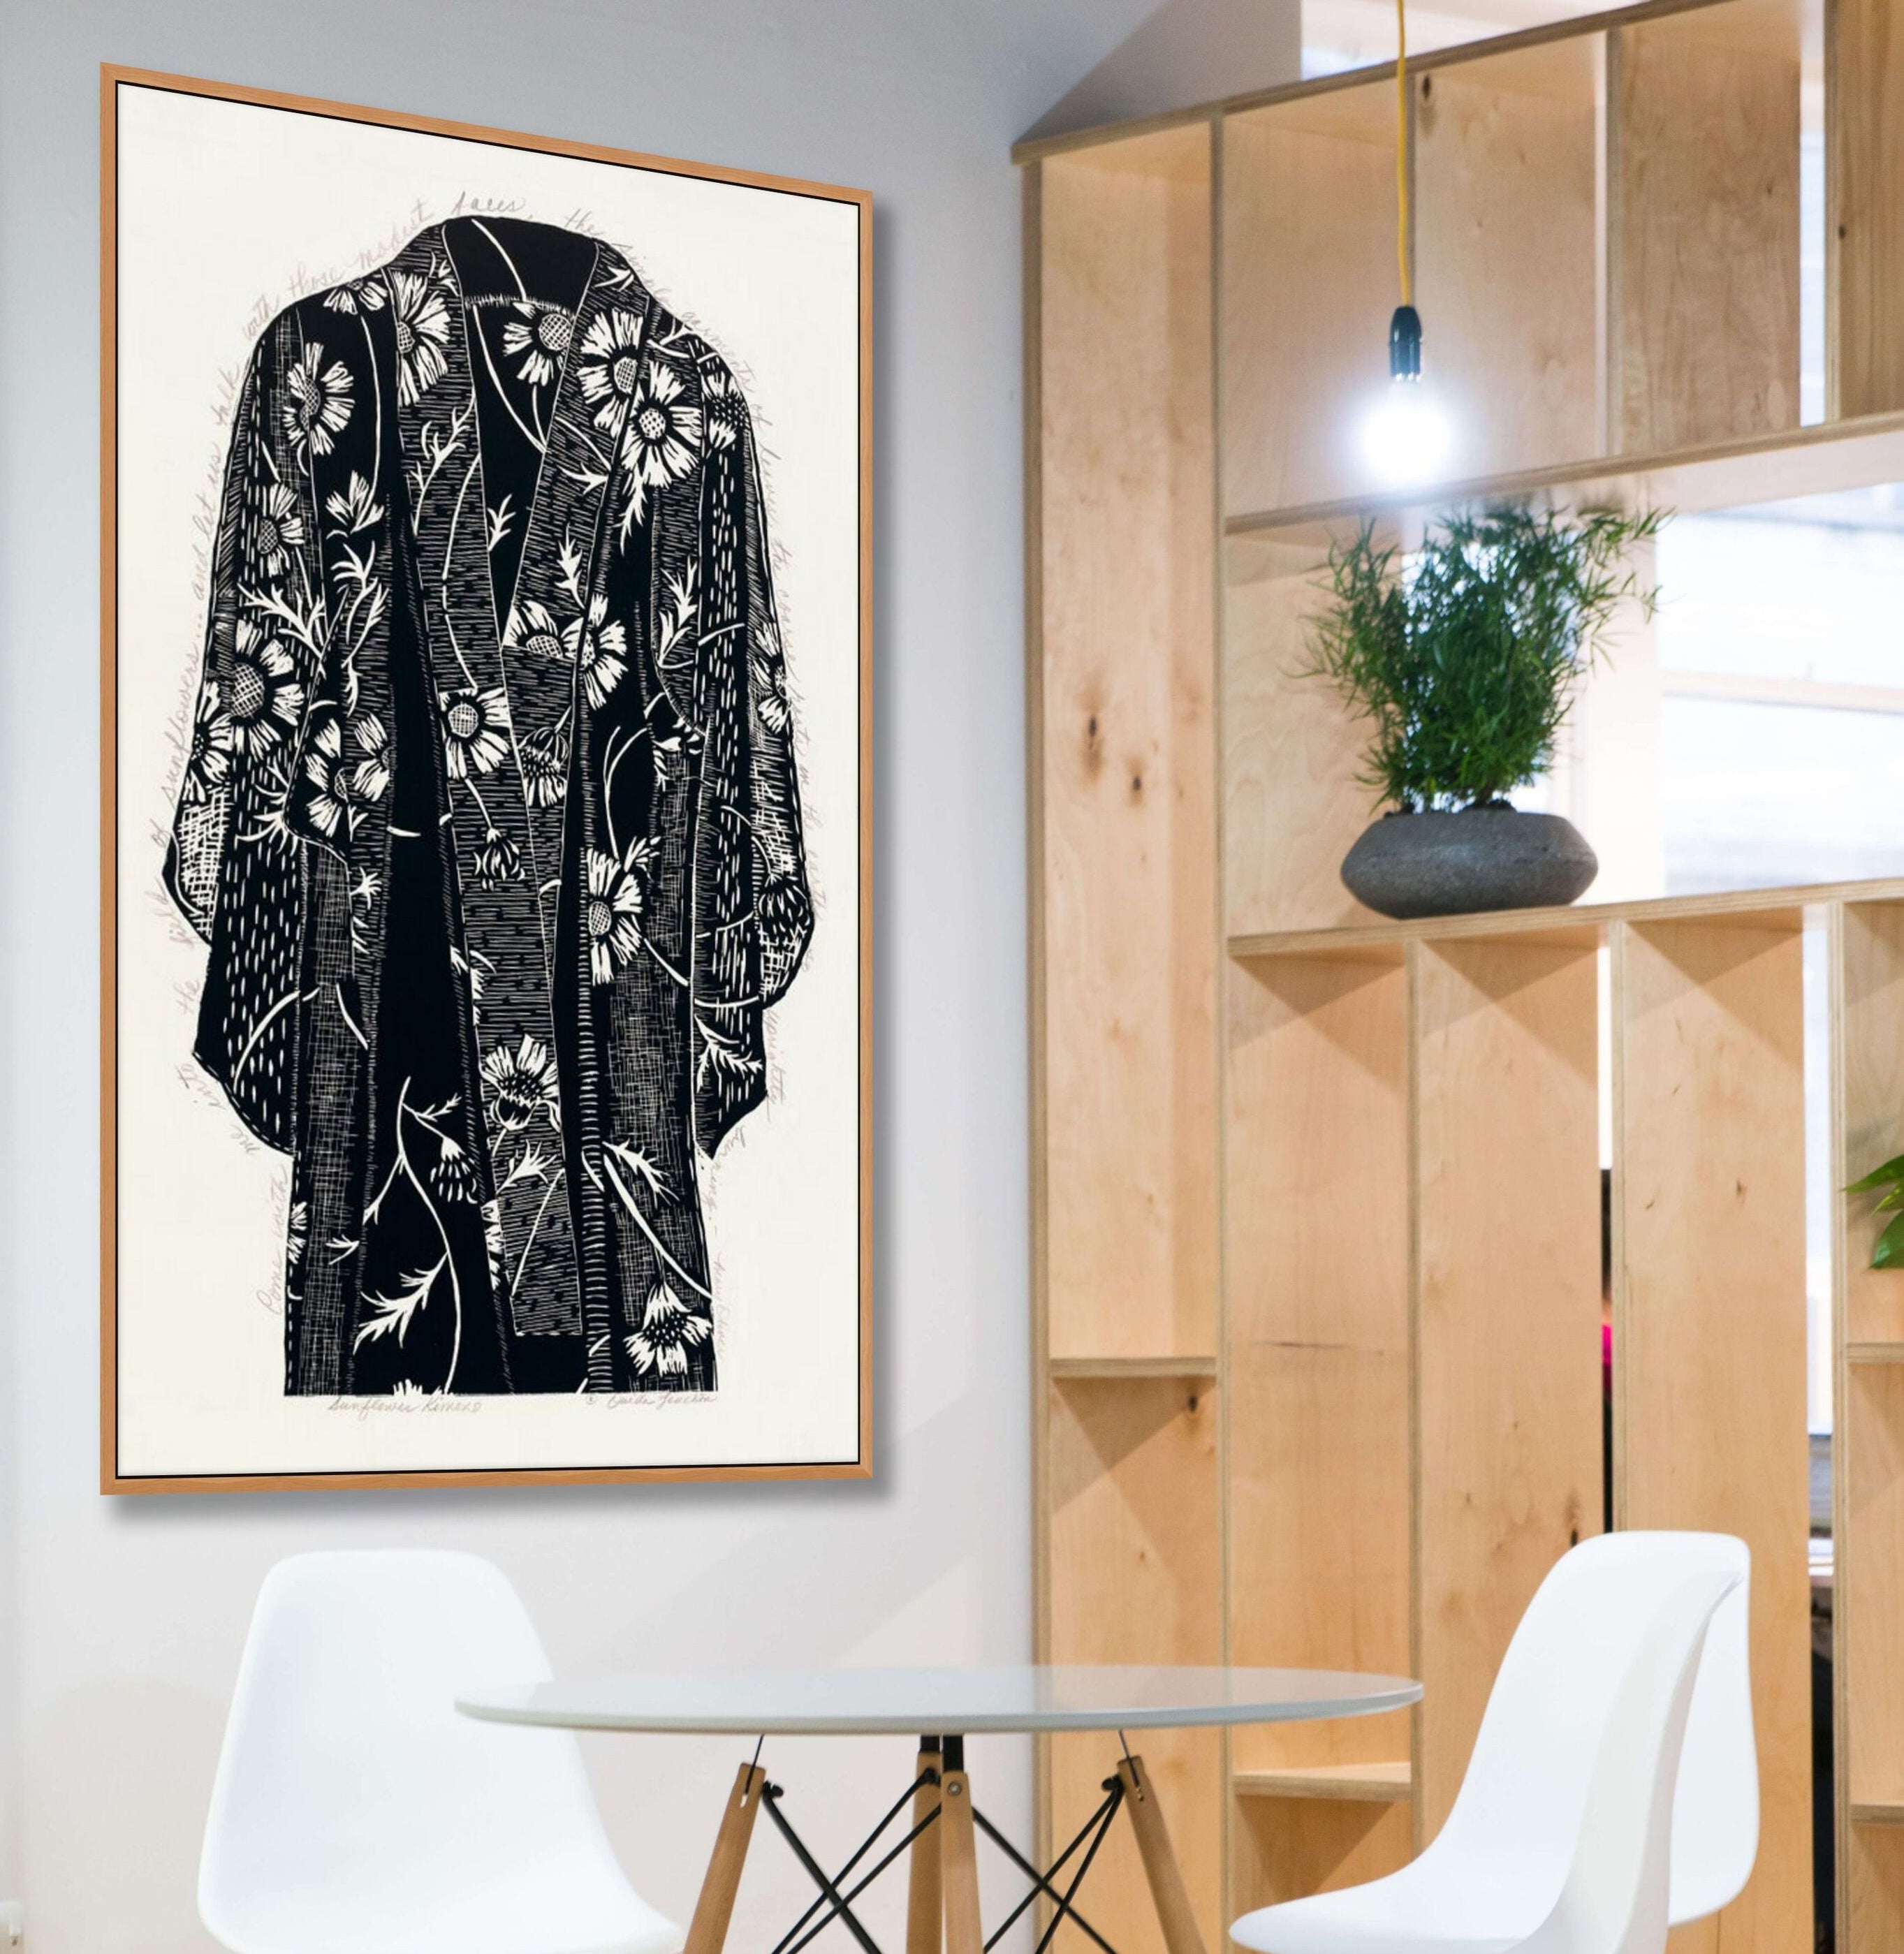 in situ, Sunflower Kimono, hand printed in black ink on Japanese paper, for sale by Ouida Touchon